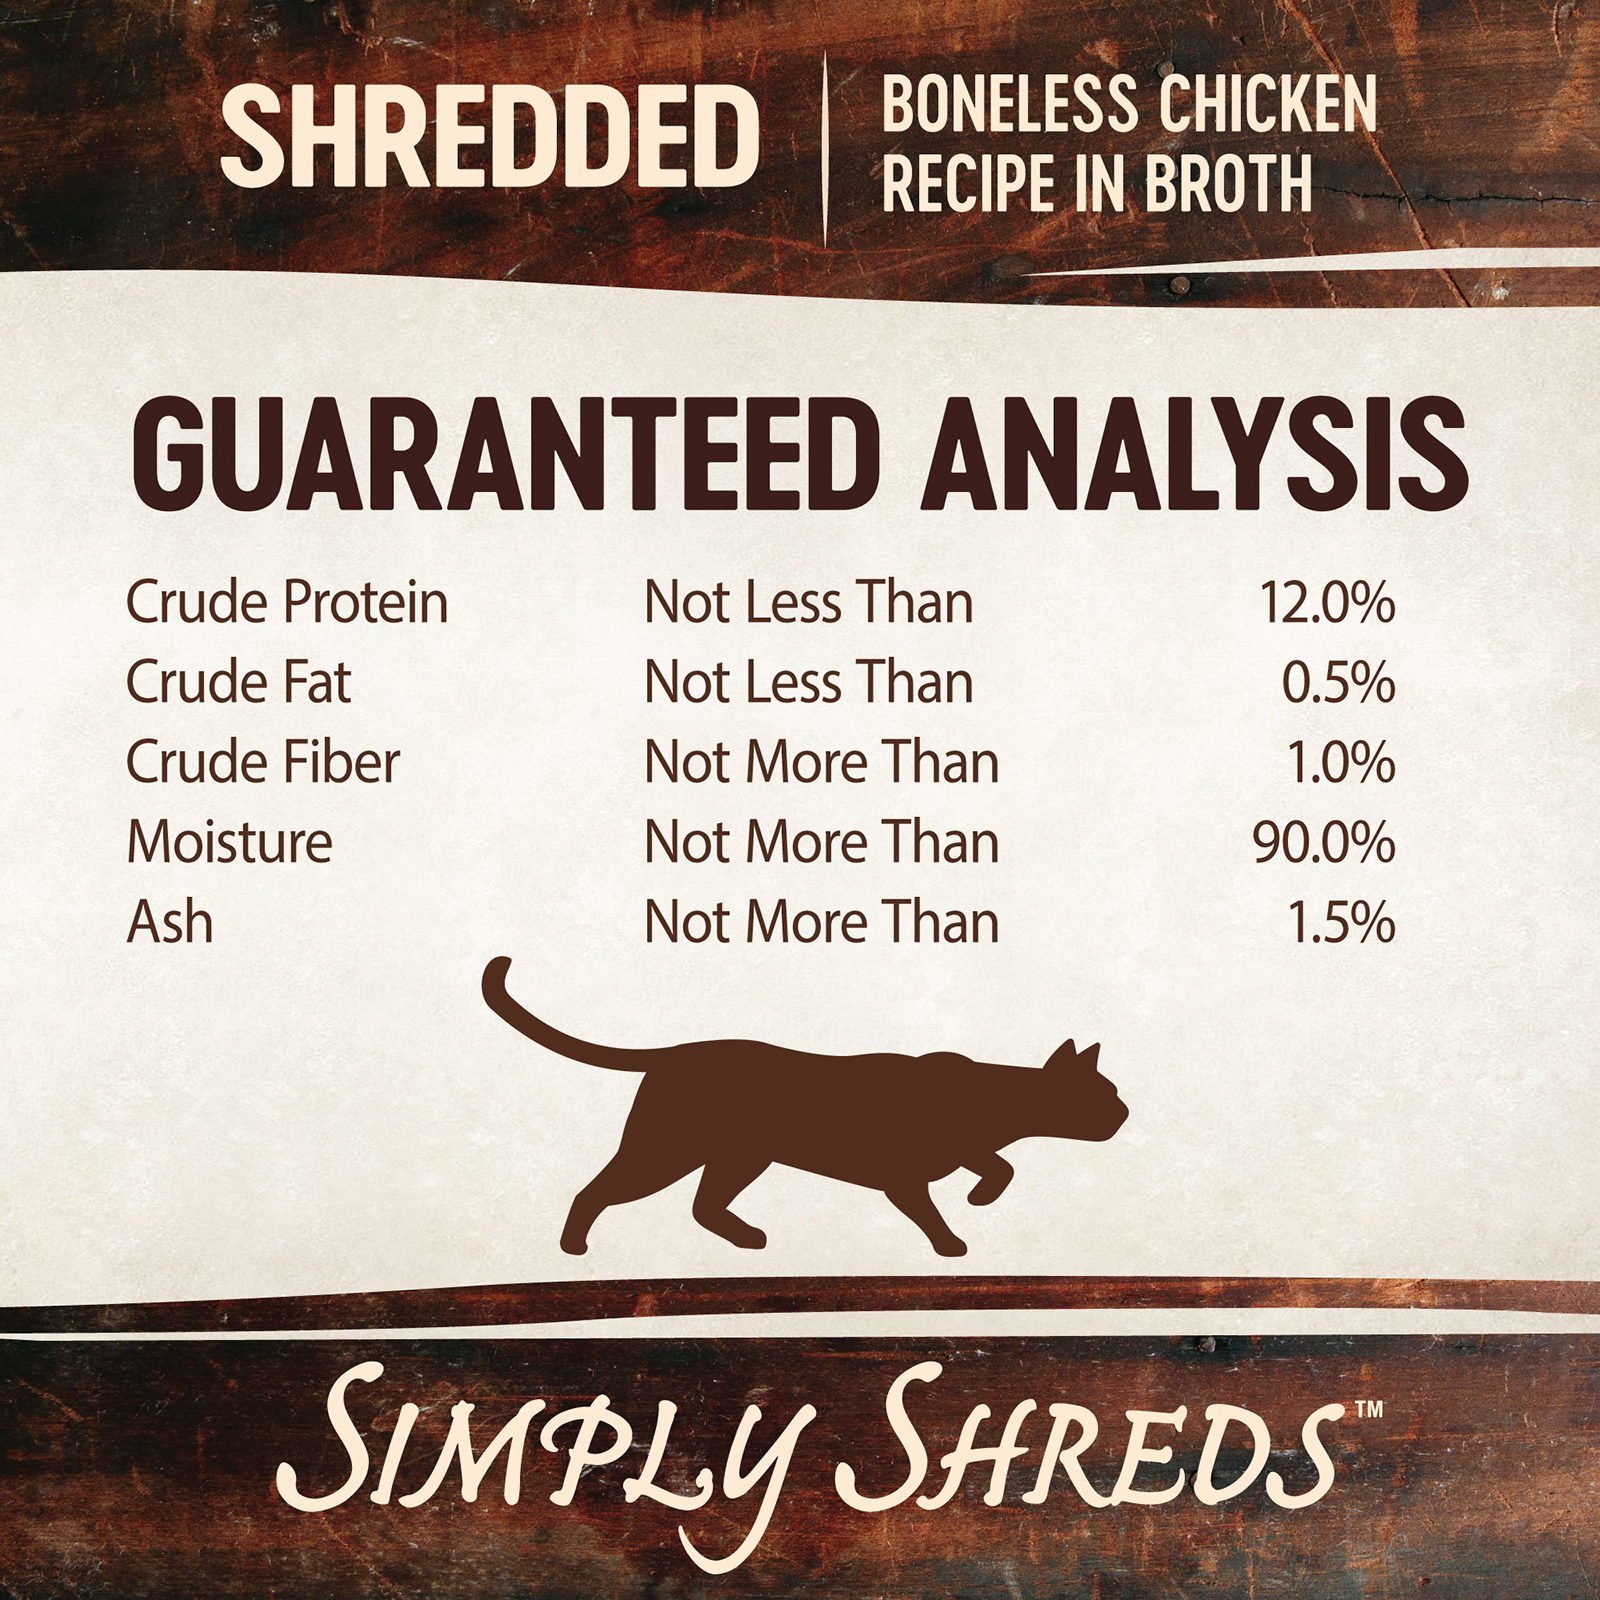 Wellness CORE Simply Shreds Cat Food Pouch Adult Shredded Boneless Chicken in Broth